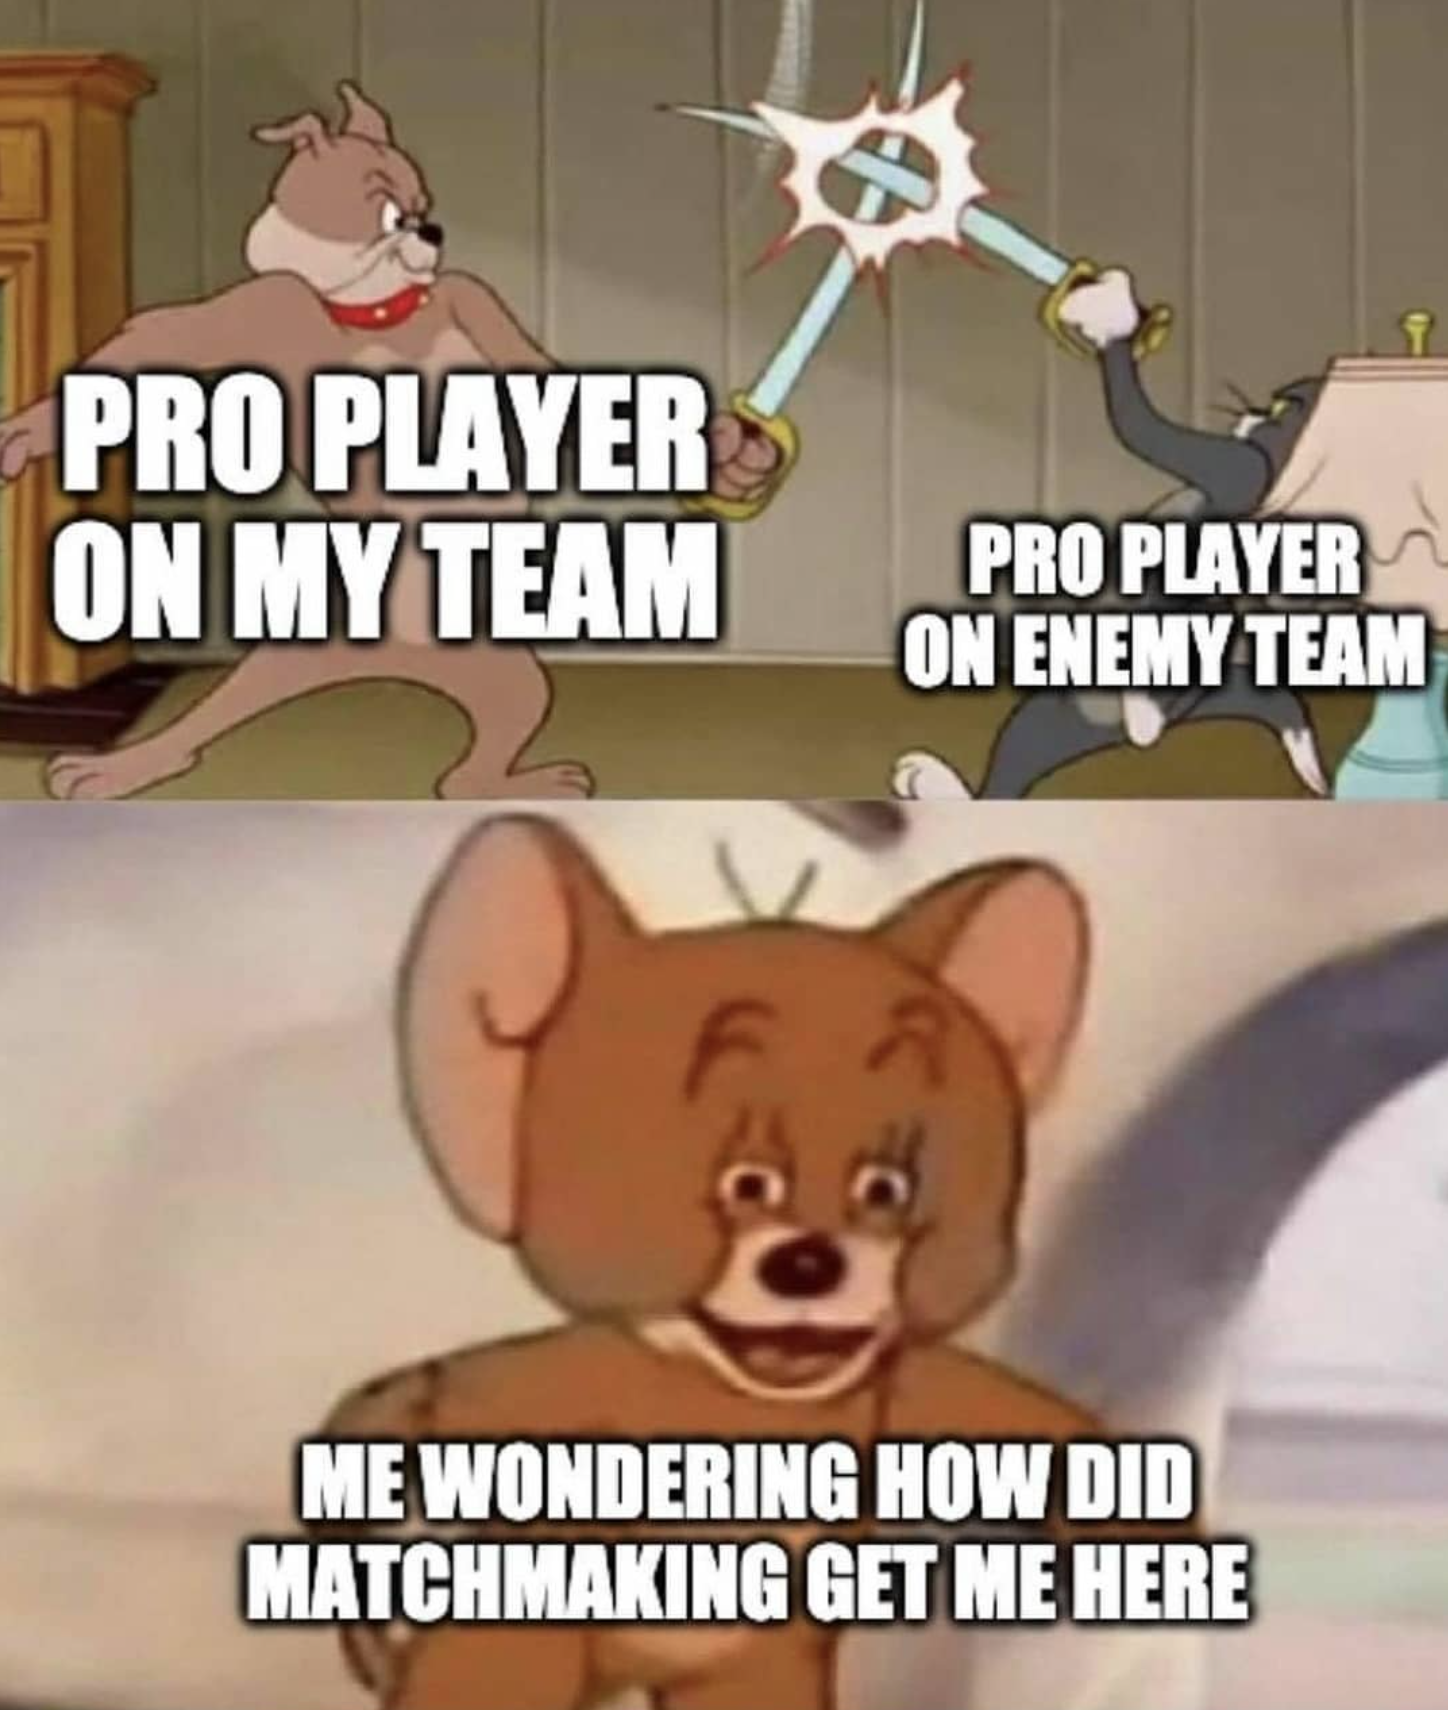 funny gaming memes - good meme templates 2020 - Pro Player On My Team Pro Player On Enemy Team Me Wondering How Did Matchmaking Get Me Here